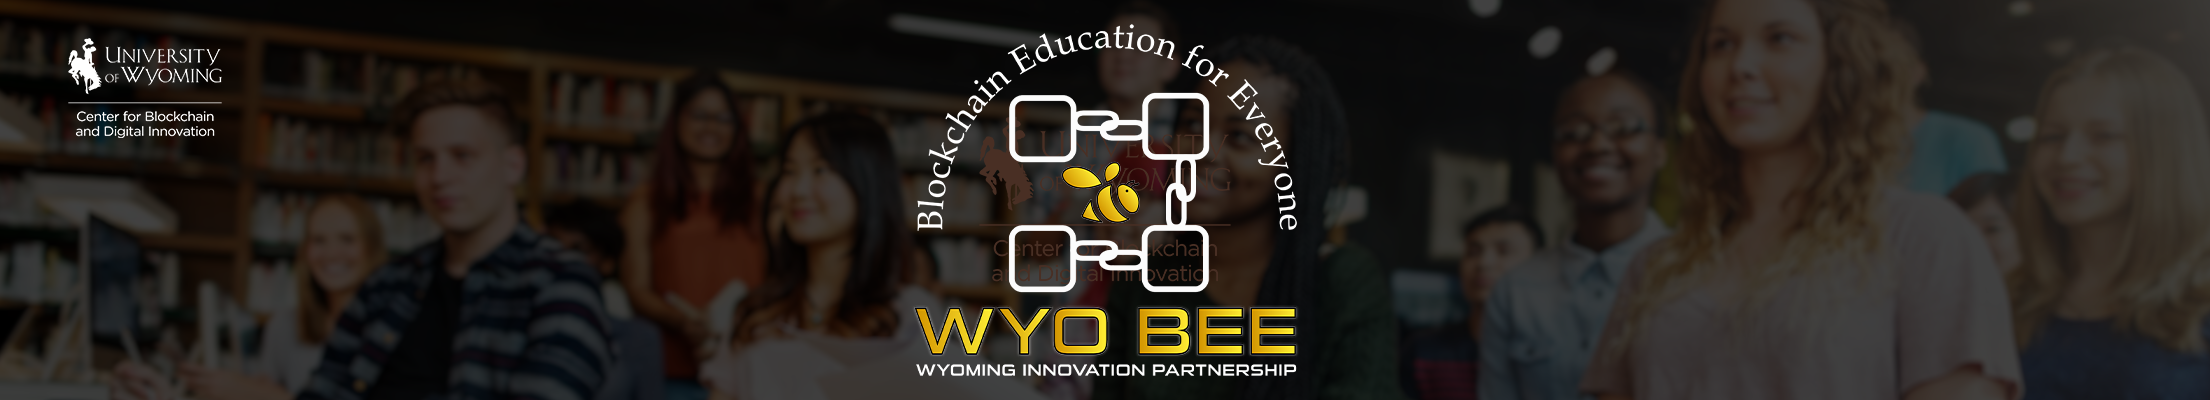 WyoBEE logo with students in background